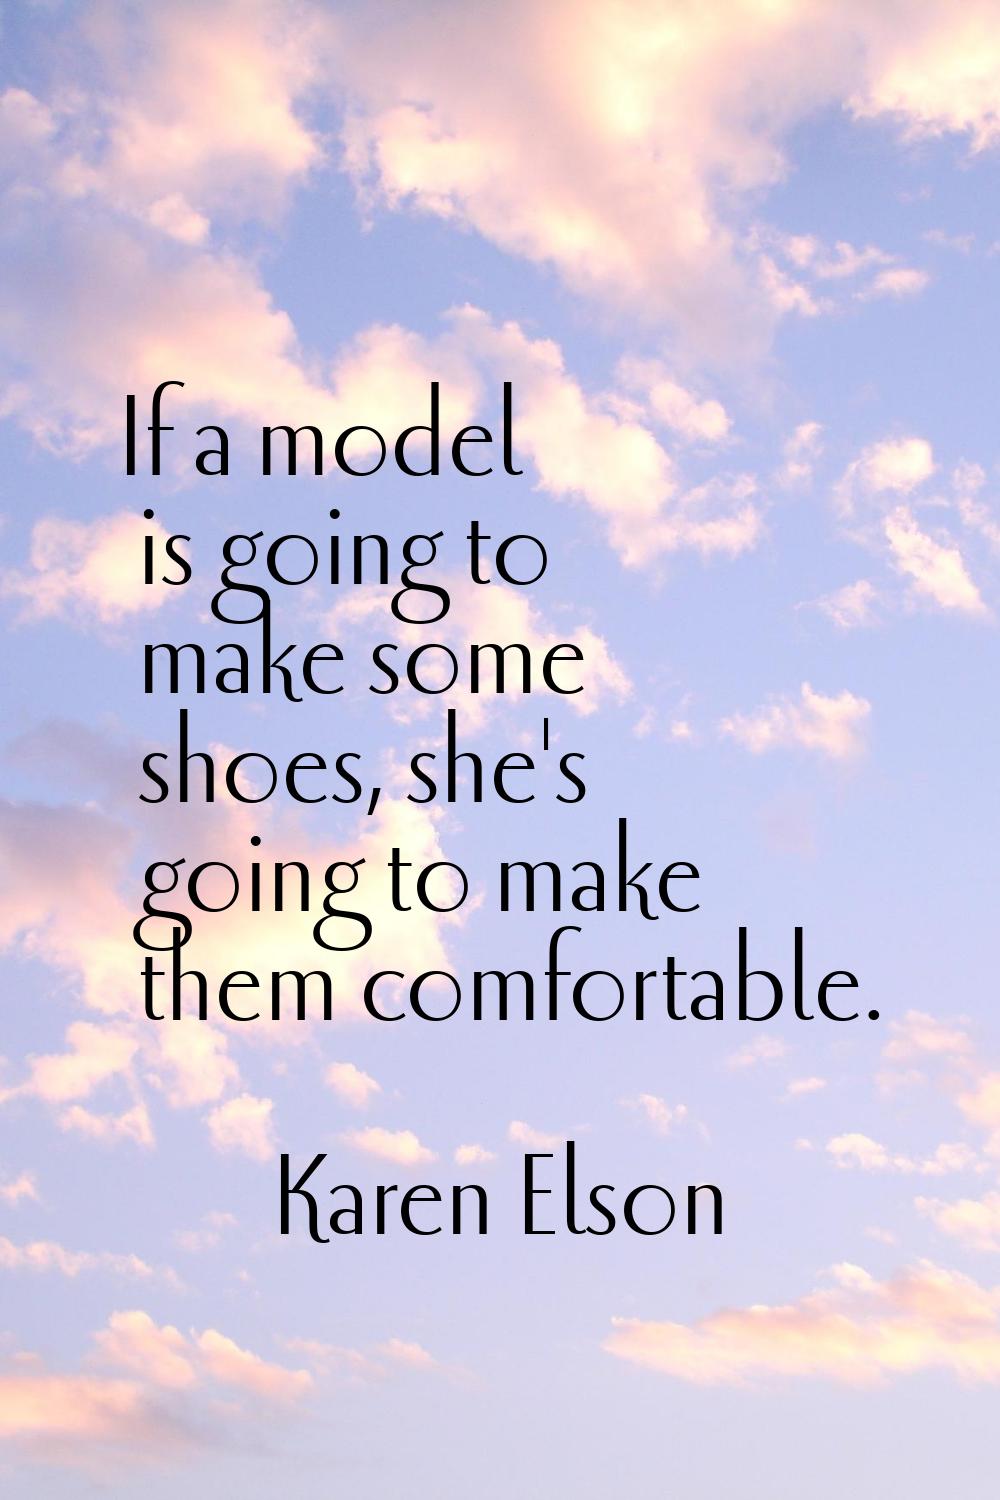 If a model is going to make some shoes, she's going to make them comfortable.